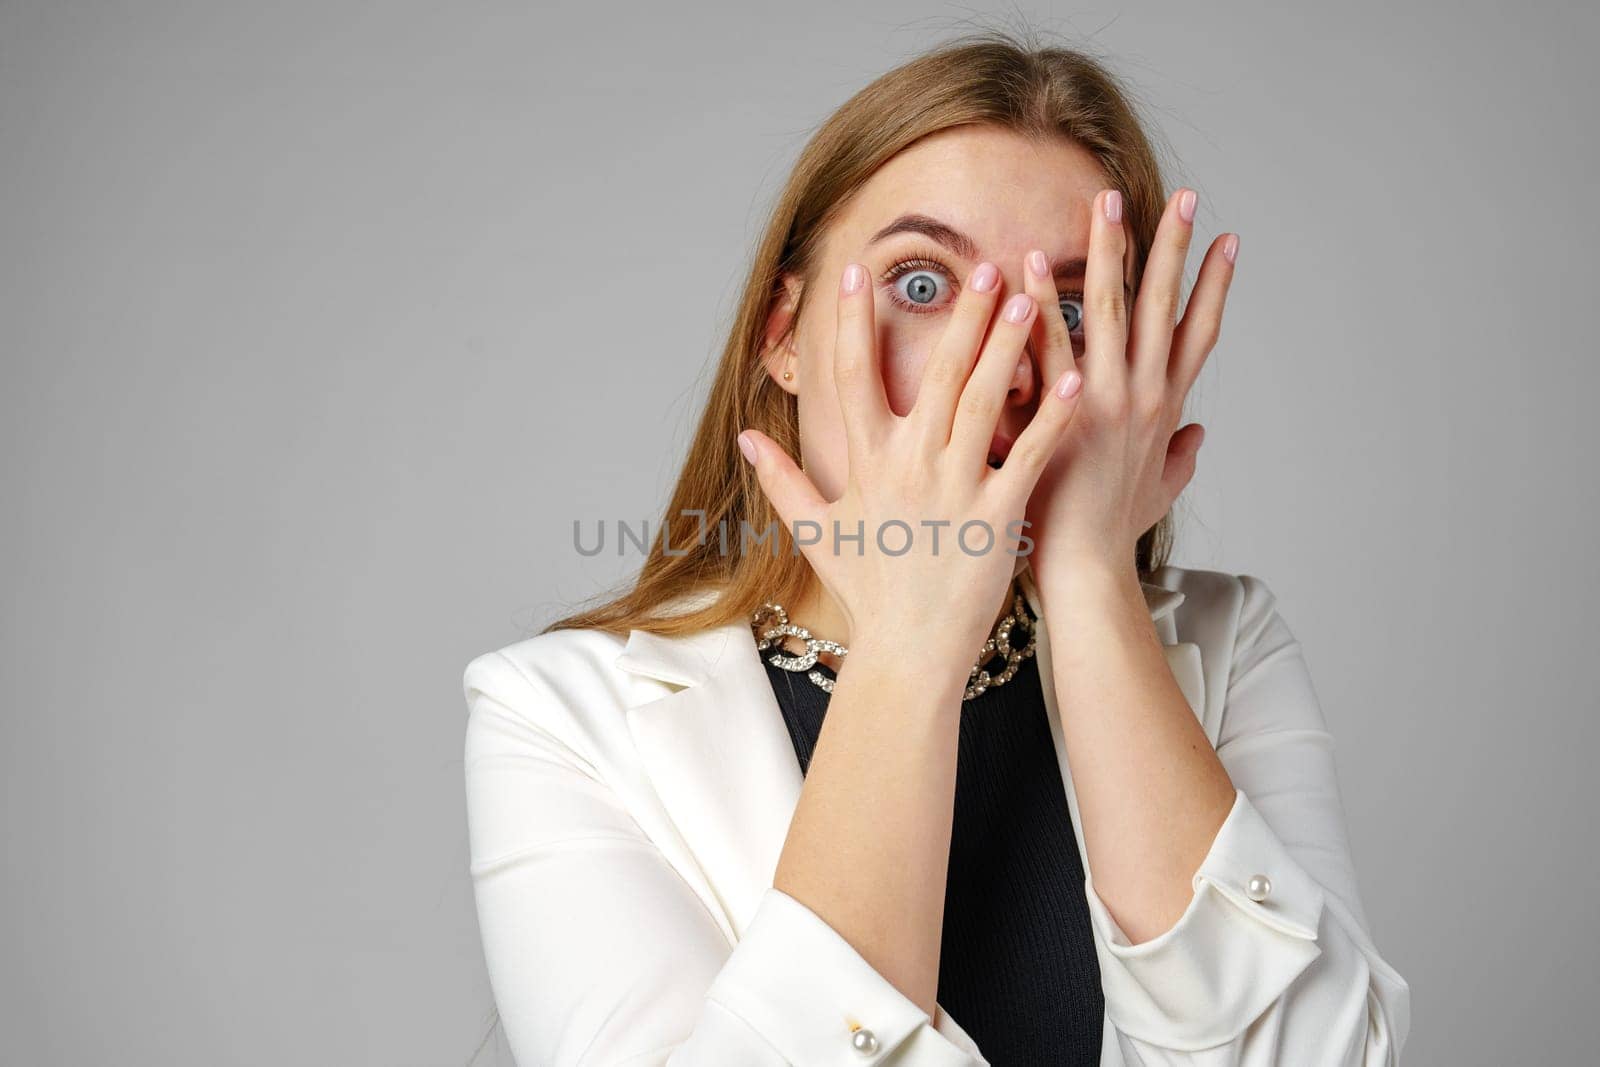 Young Woman Covering Her Eyes With Hands in Studio